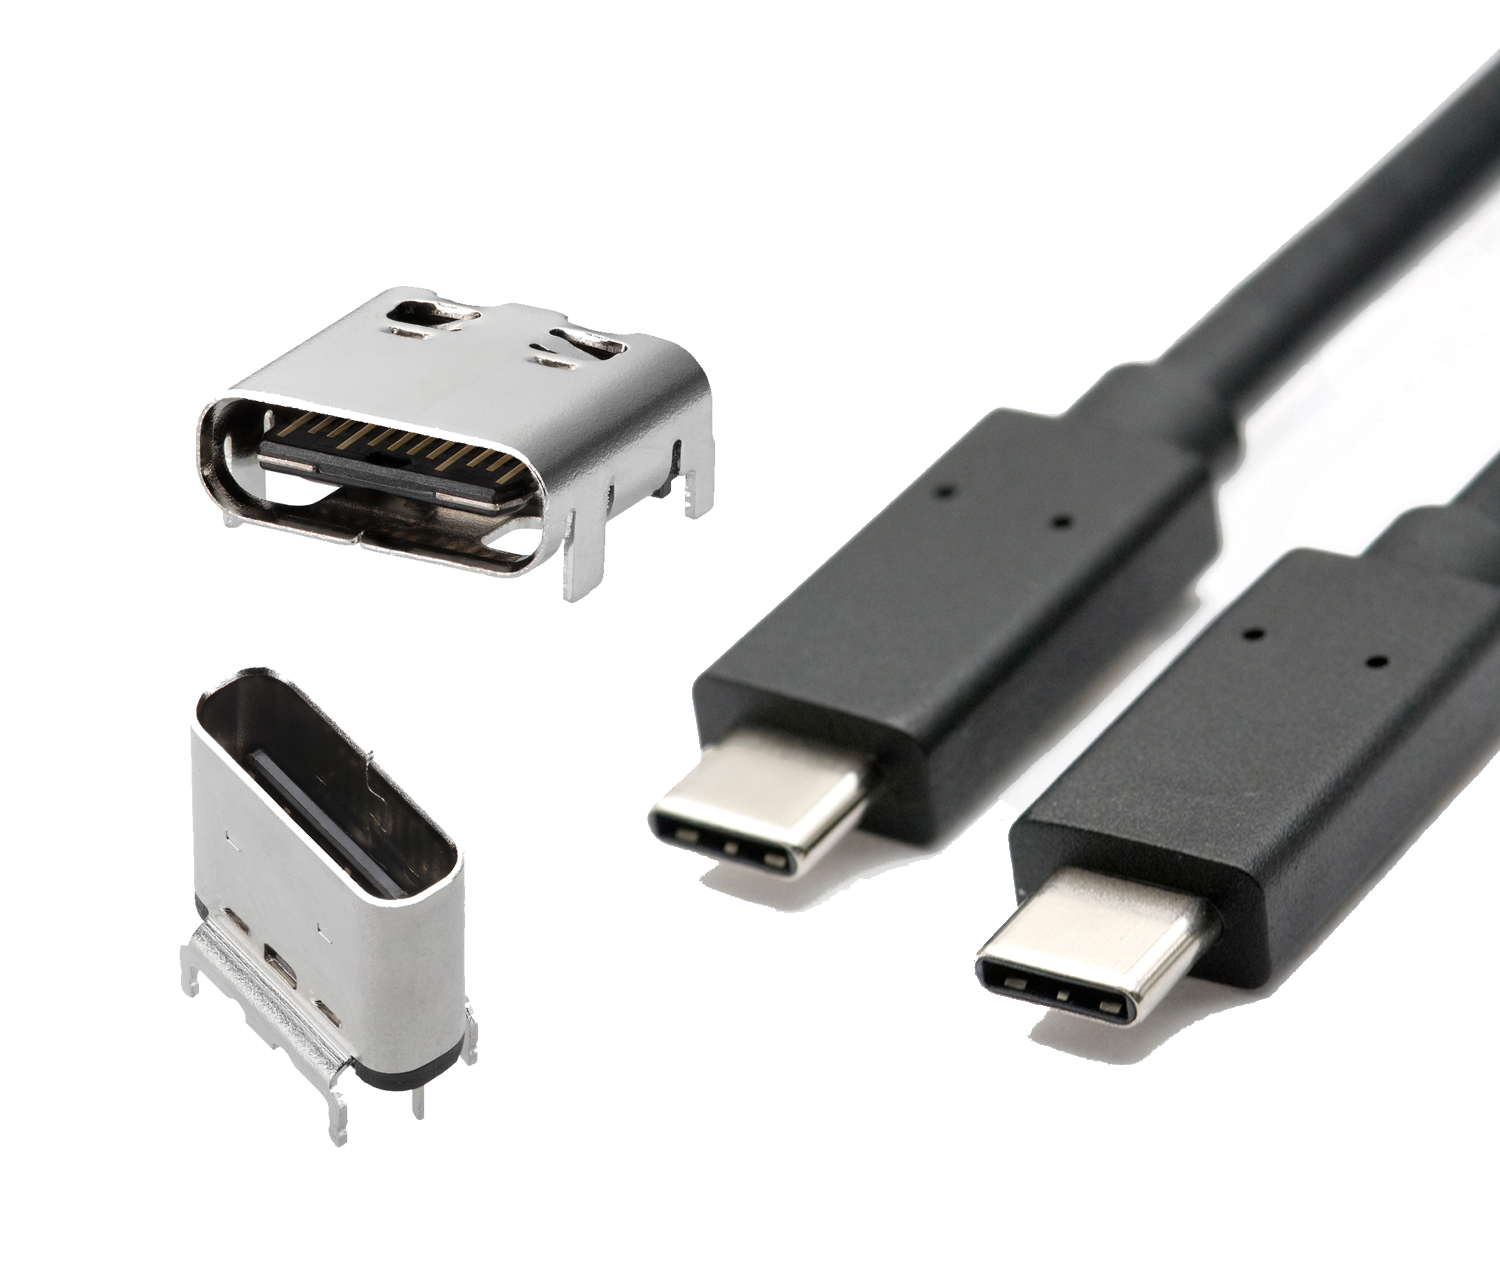 connected home - USB adapters